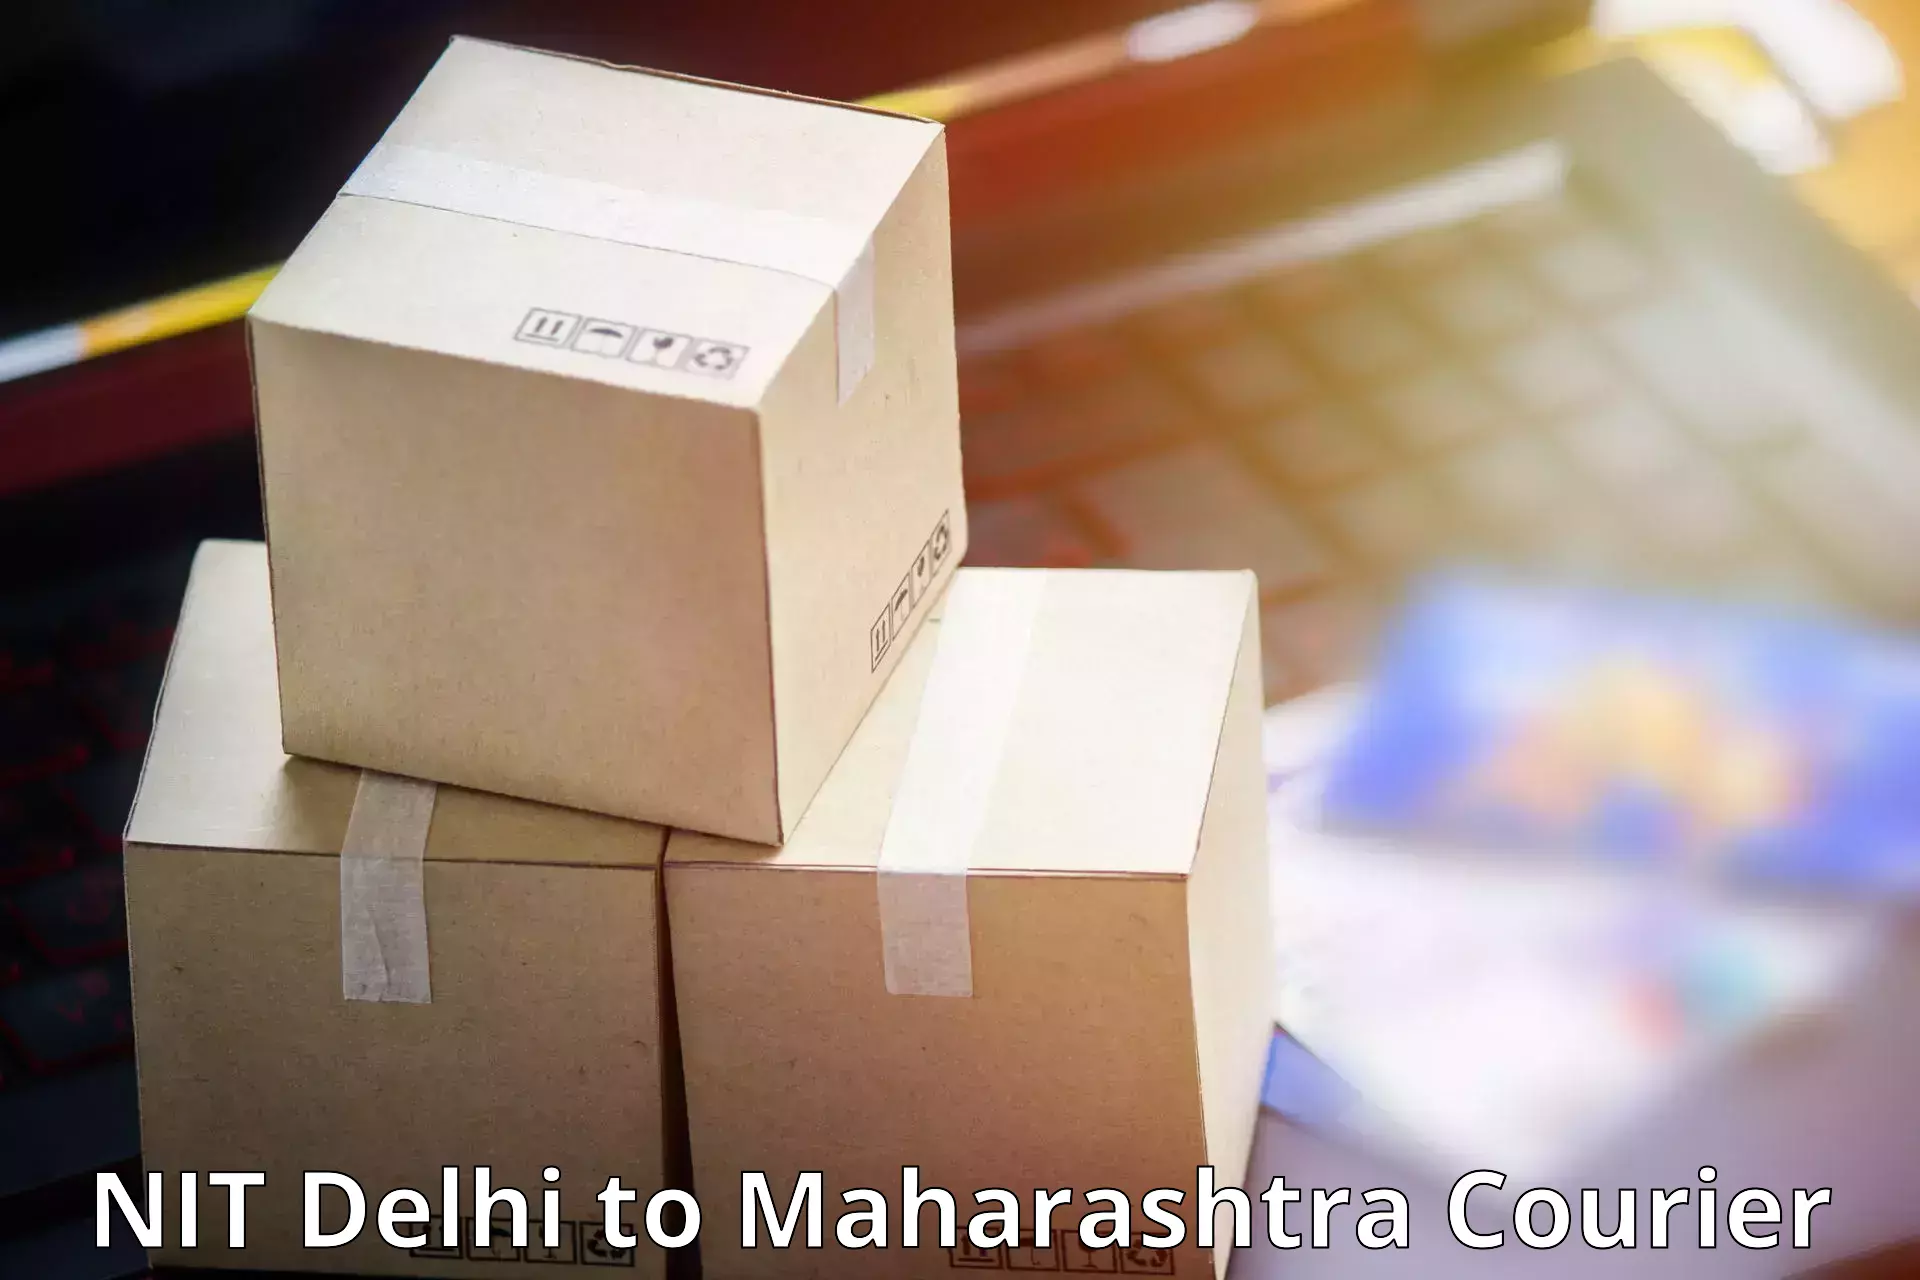 High-priority parcel service NIT Delhi to Dharmabad